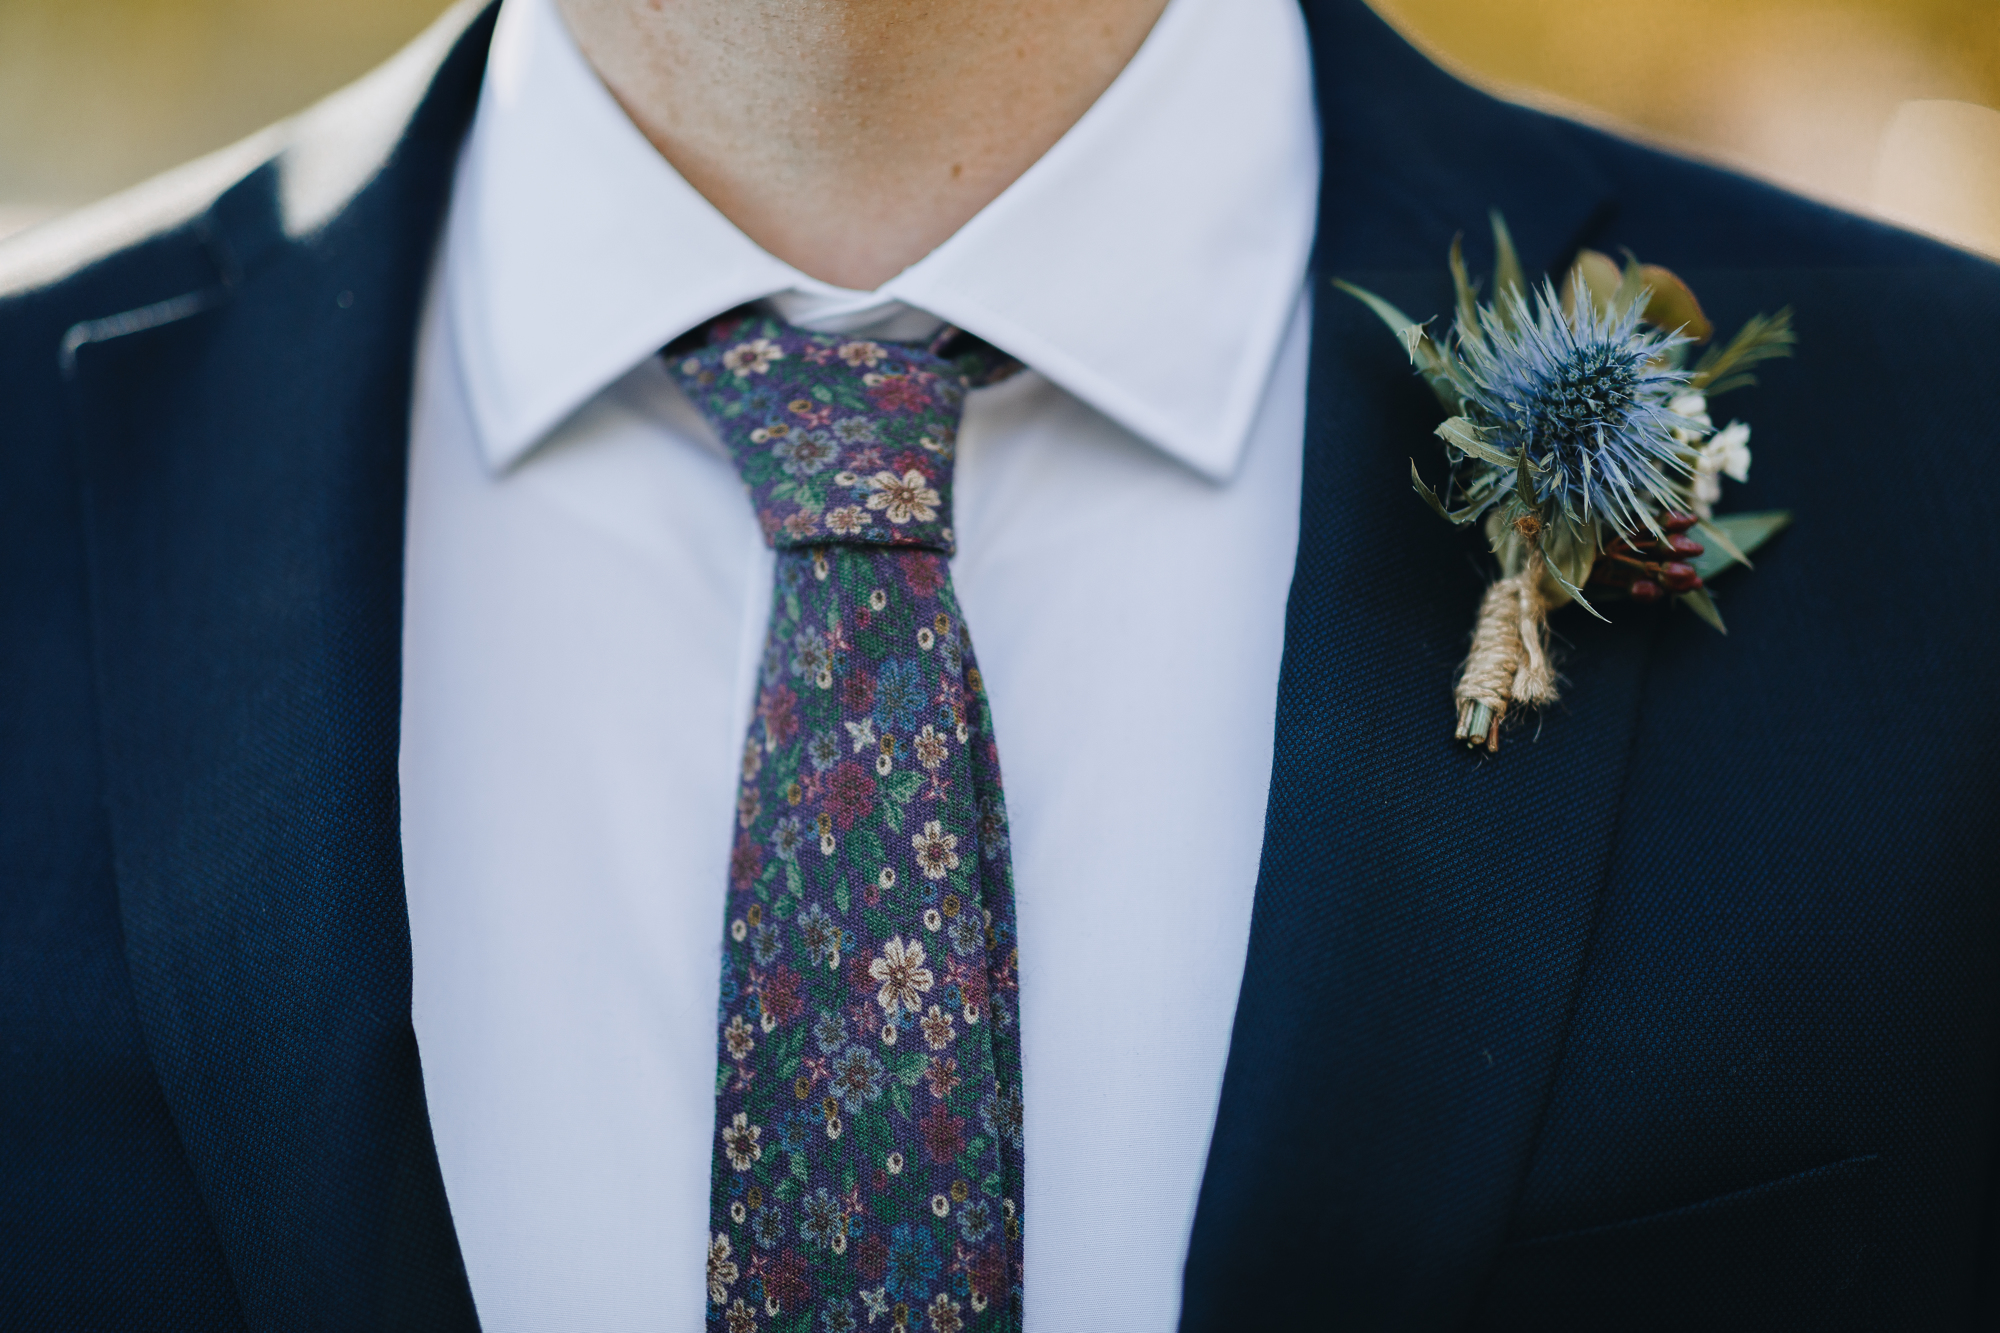 Fall wedding boutonniere and tie details in Brooklyn